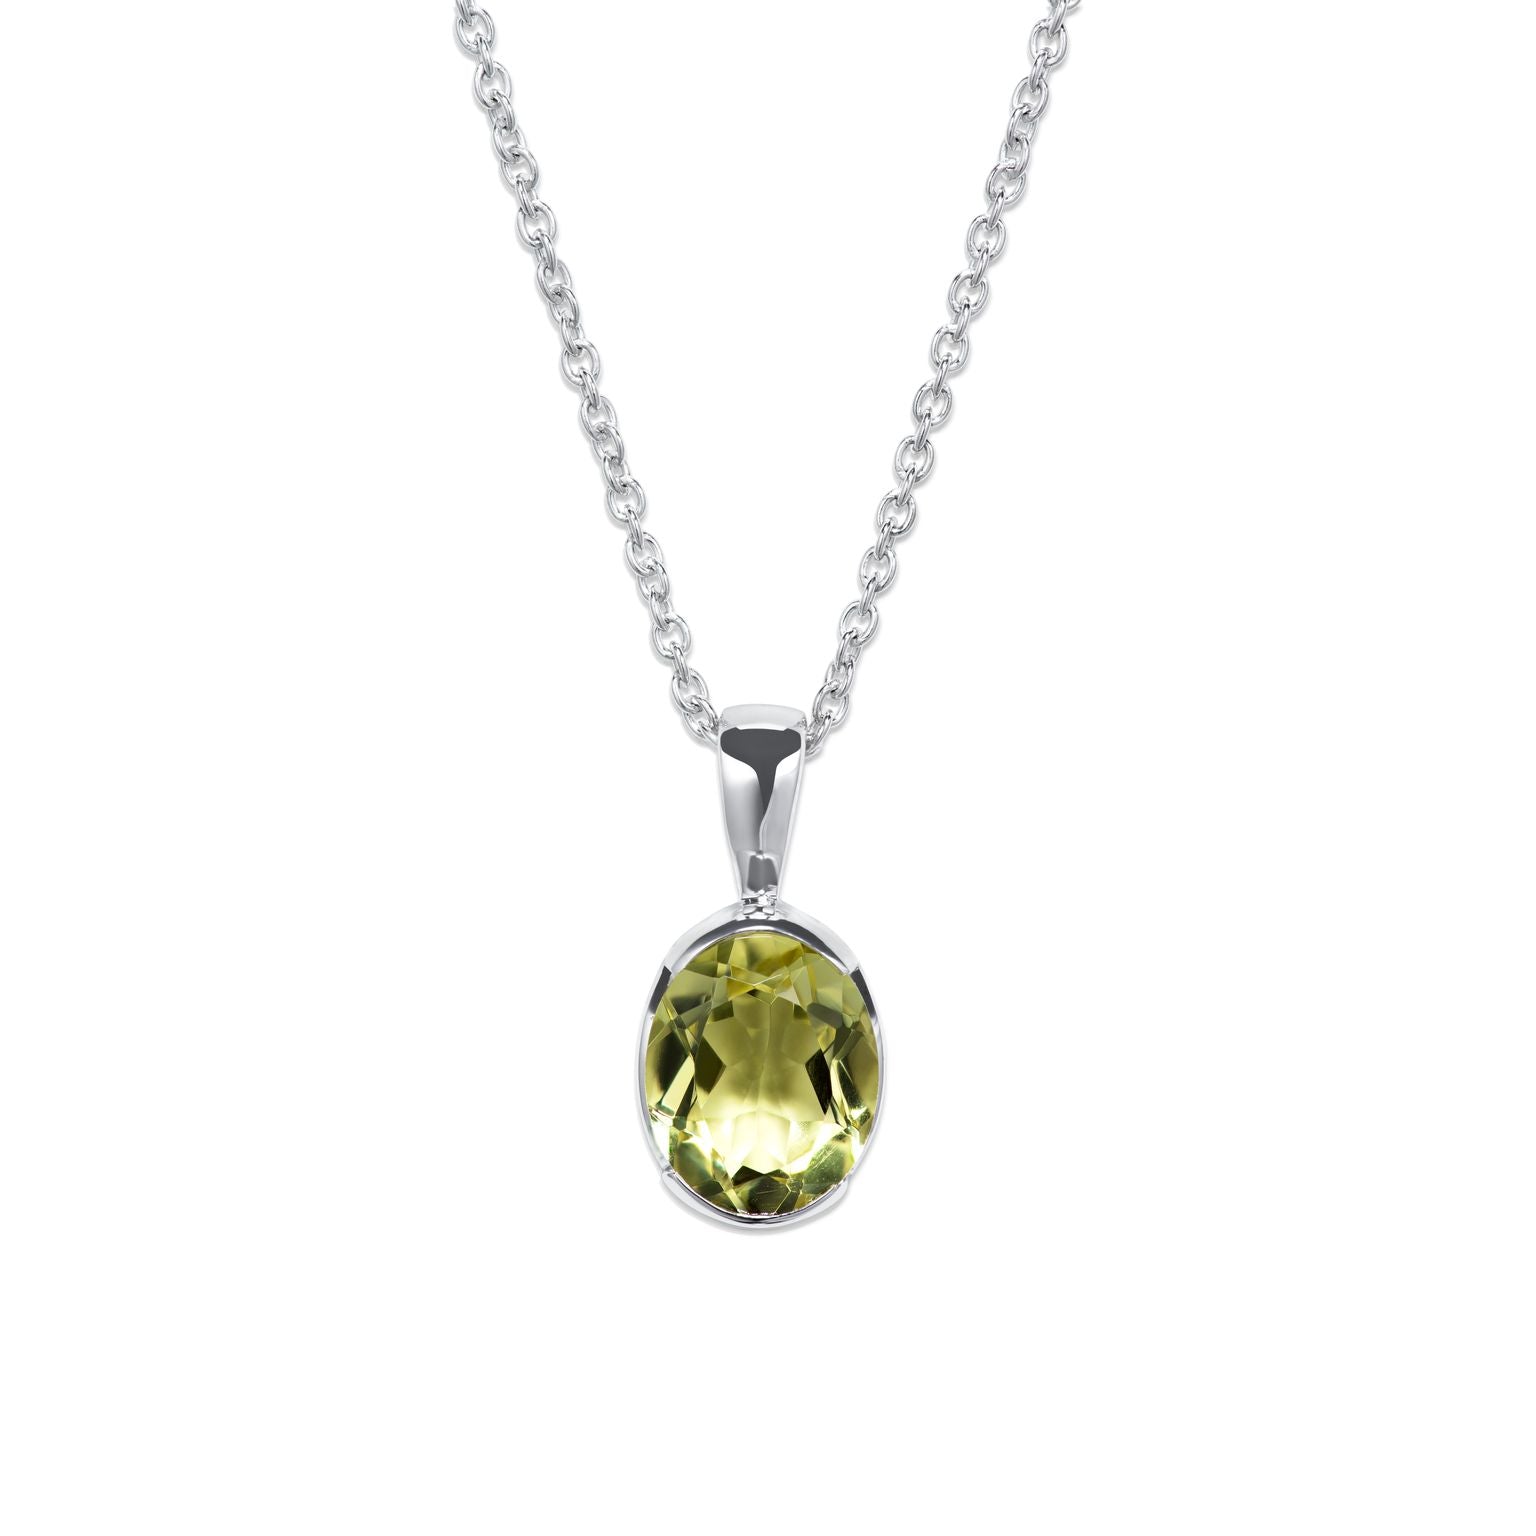 Silver Pendant with Oval Faceted Lemon Citrine